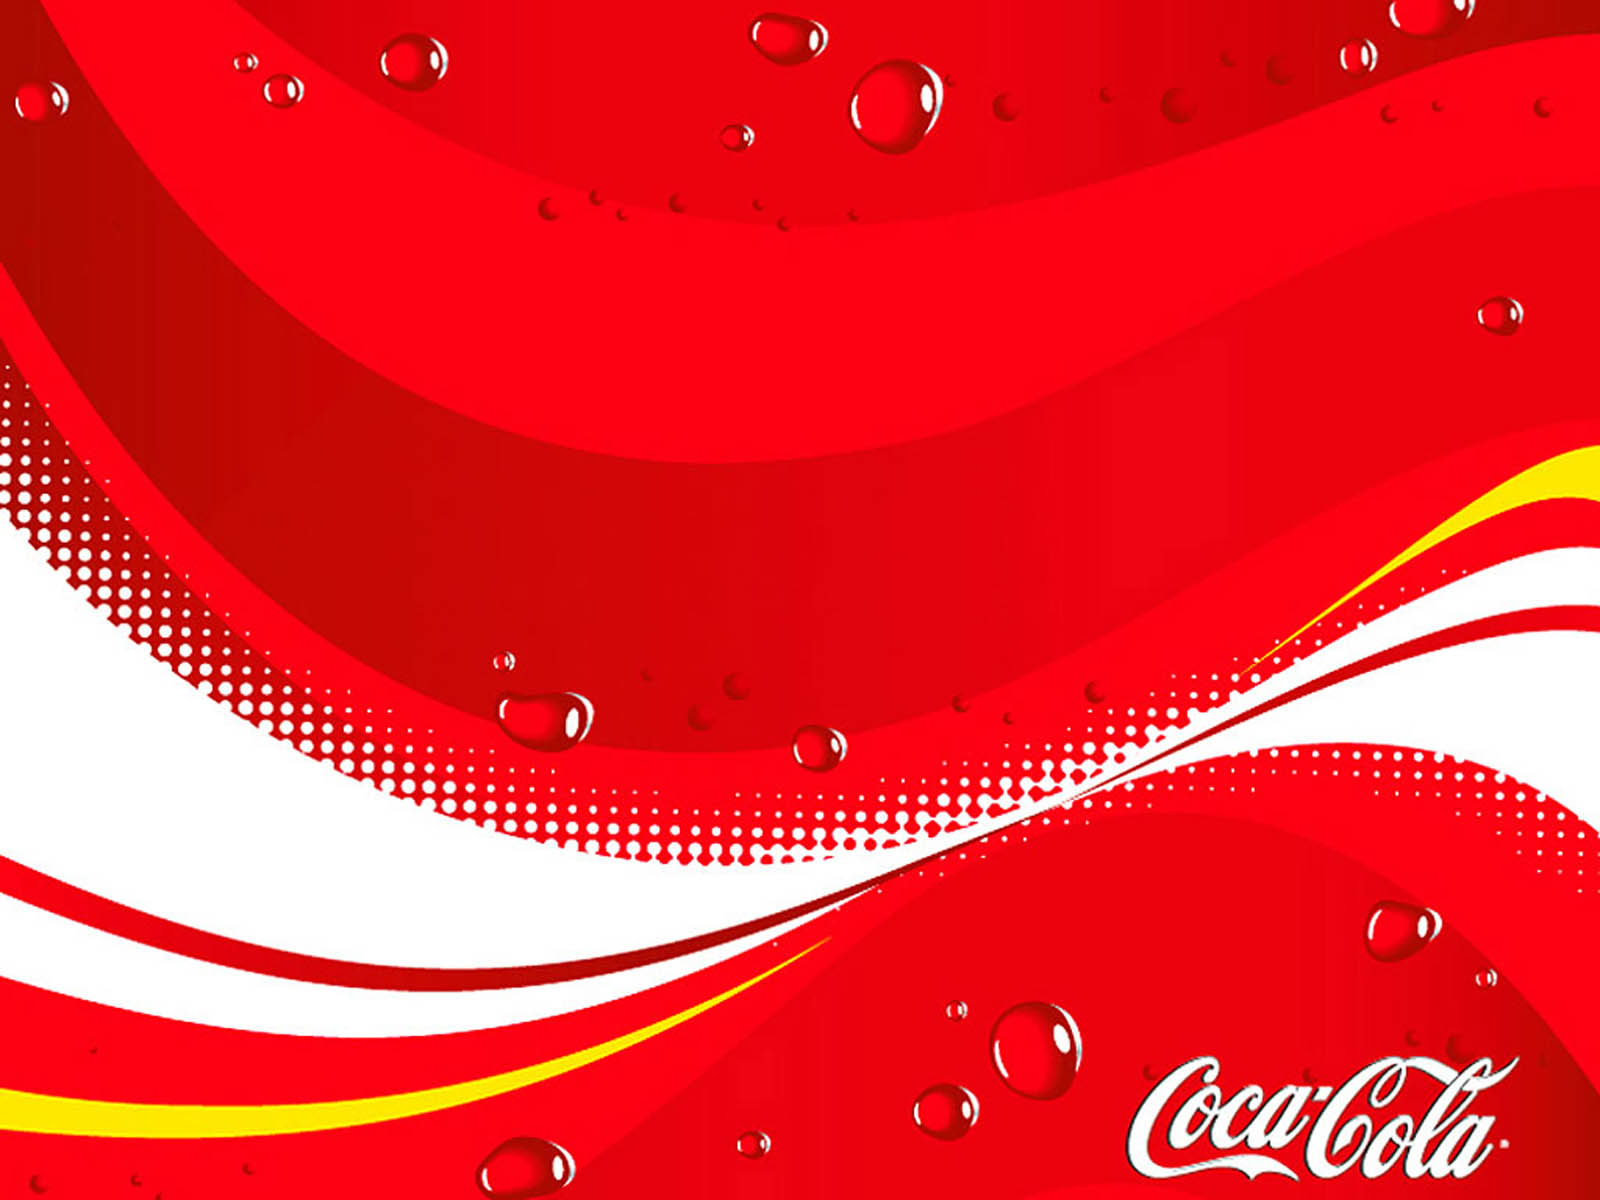 Coca Cola Wallpaper Background Photos Image And Pictures For